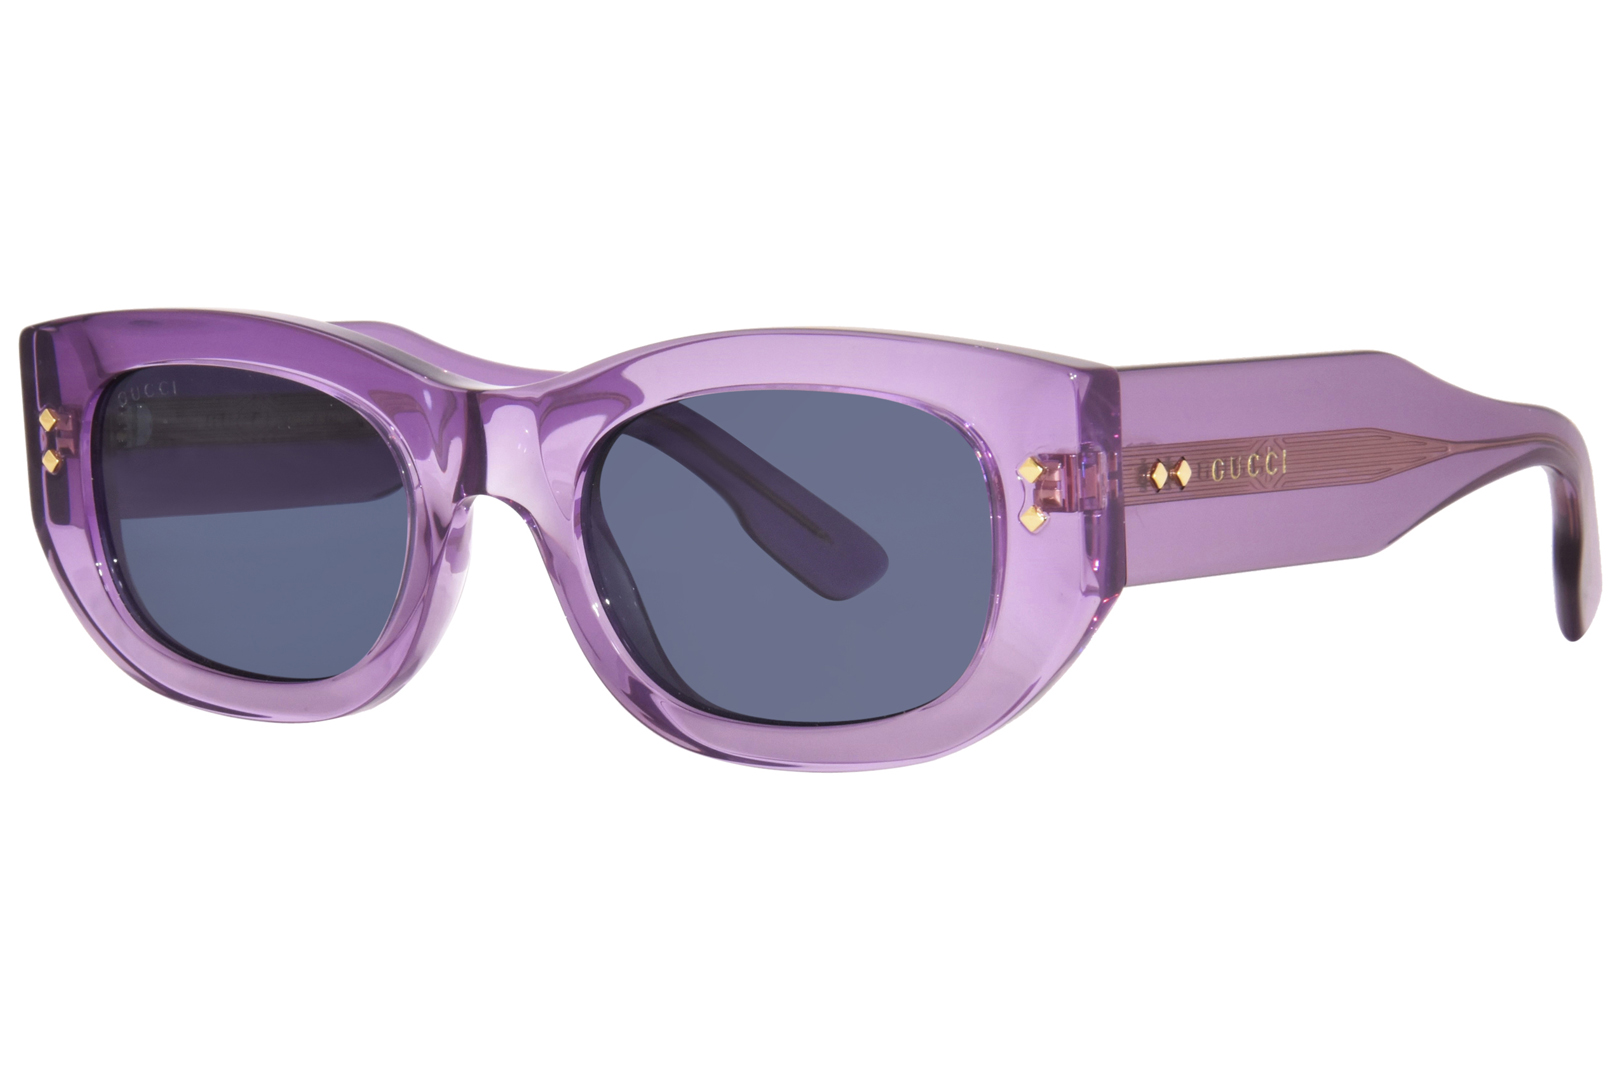 UPC 889652394473 product image for Gucci GG1215S 003 Sunglasses Women's Violet/Blue Rectangle Shape 51 22 145 - Pur | upcitemdb.com